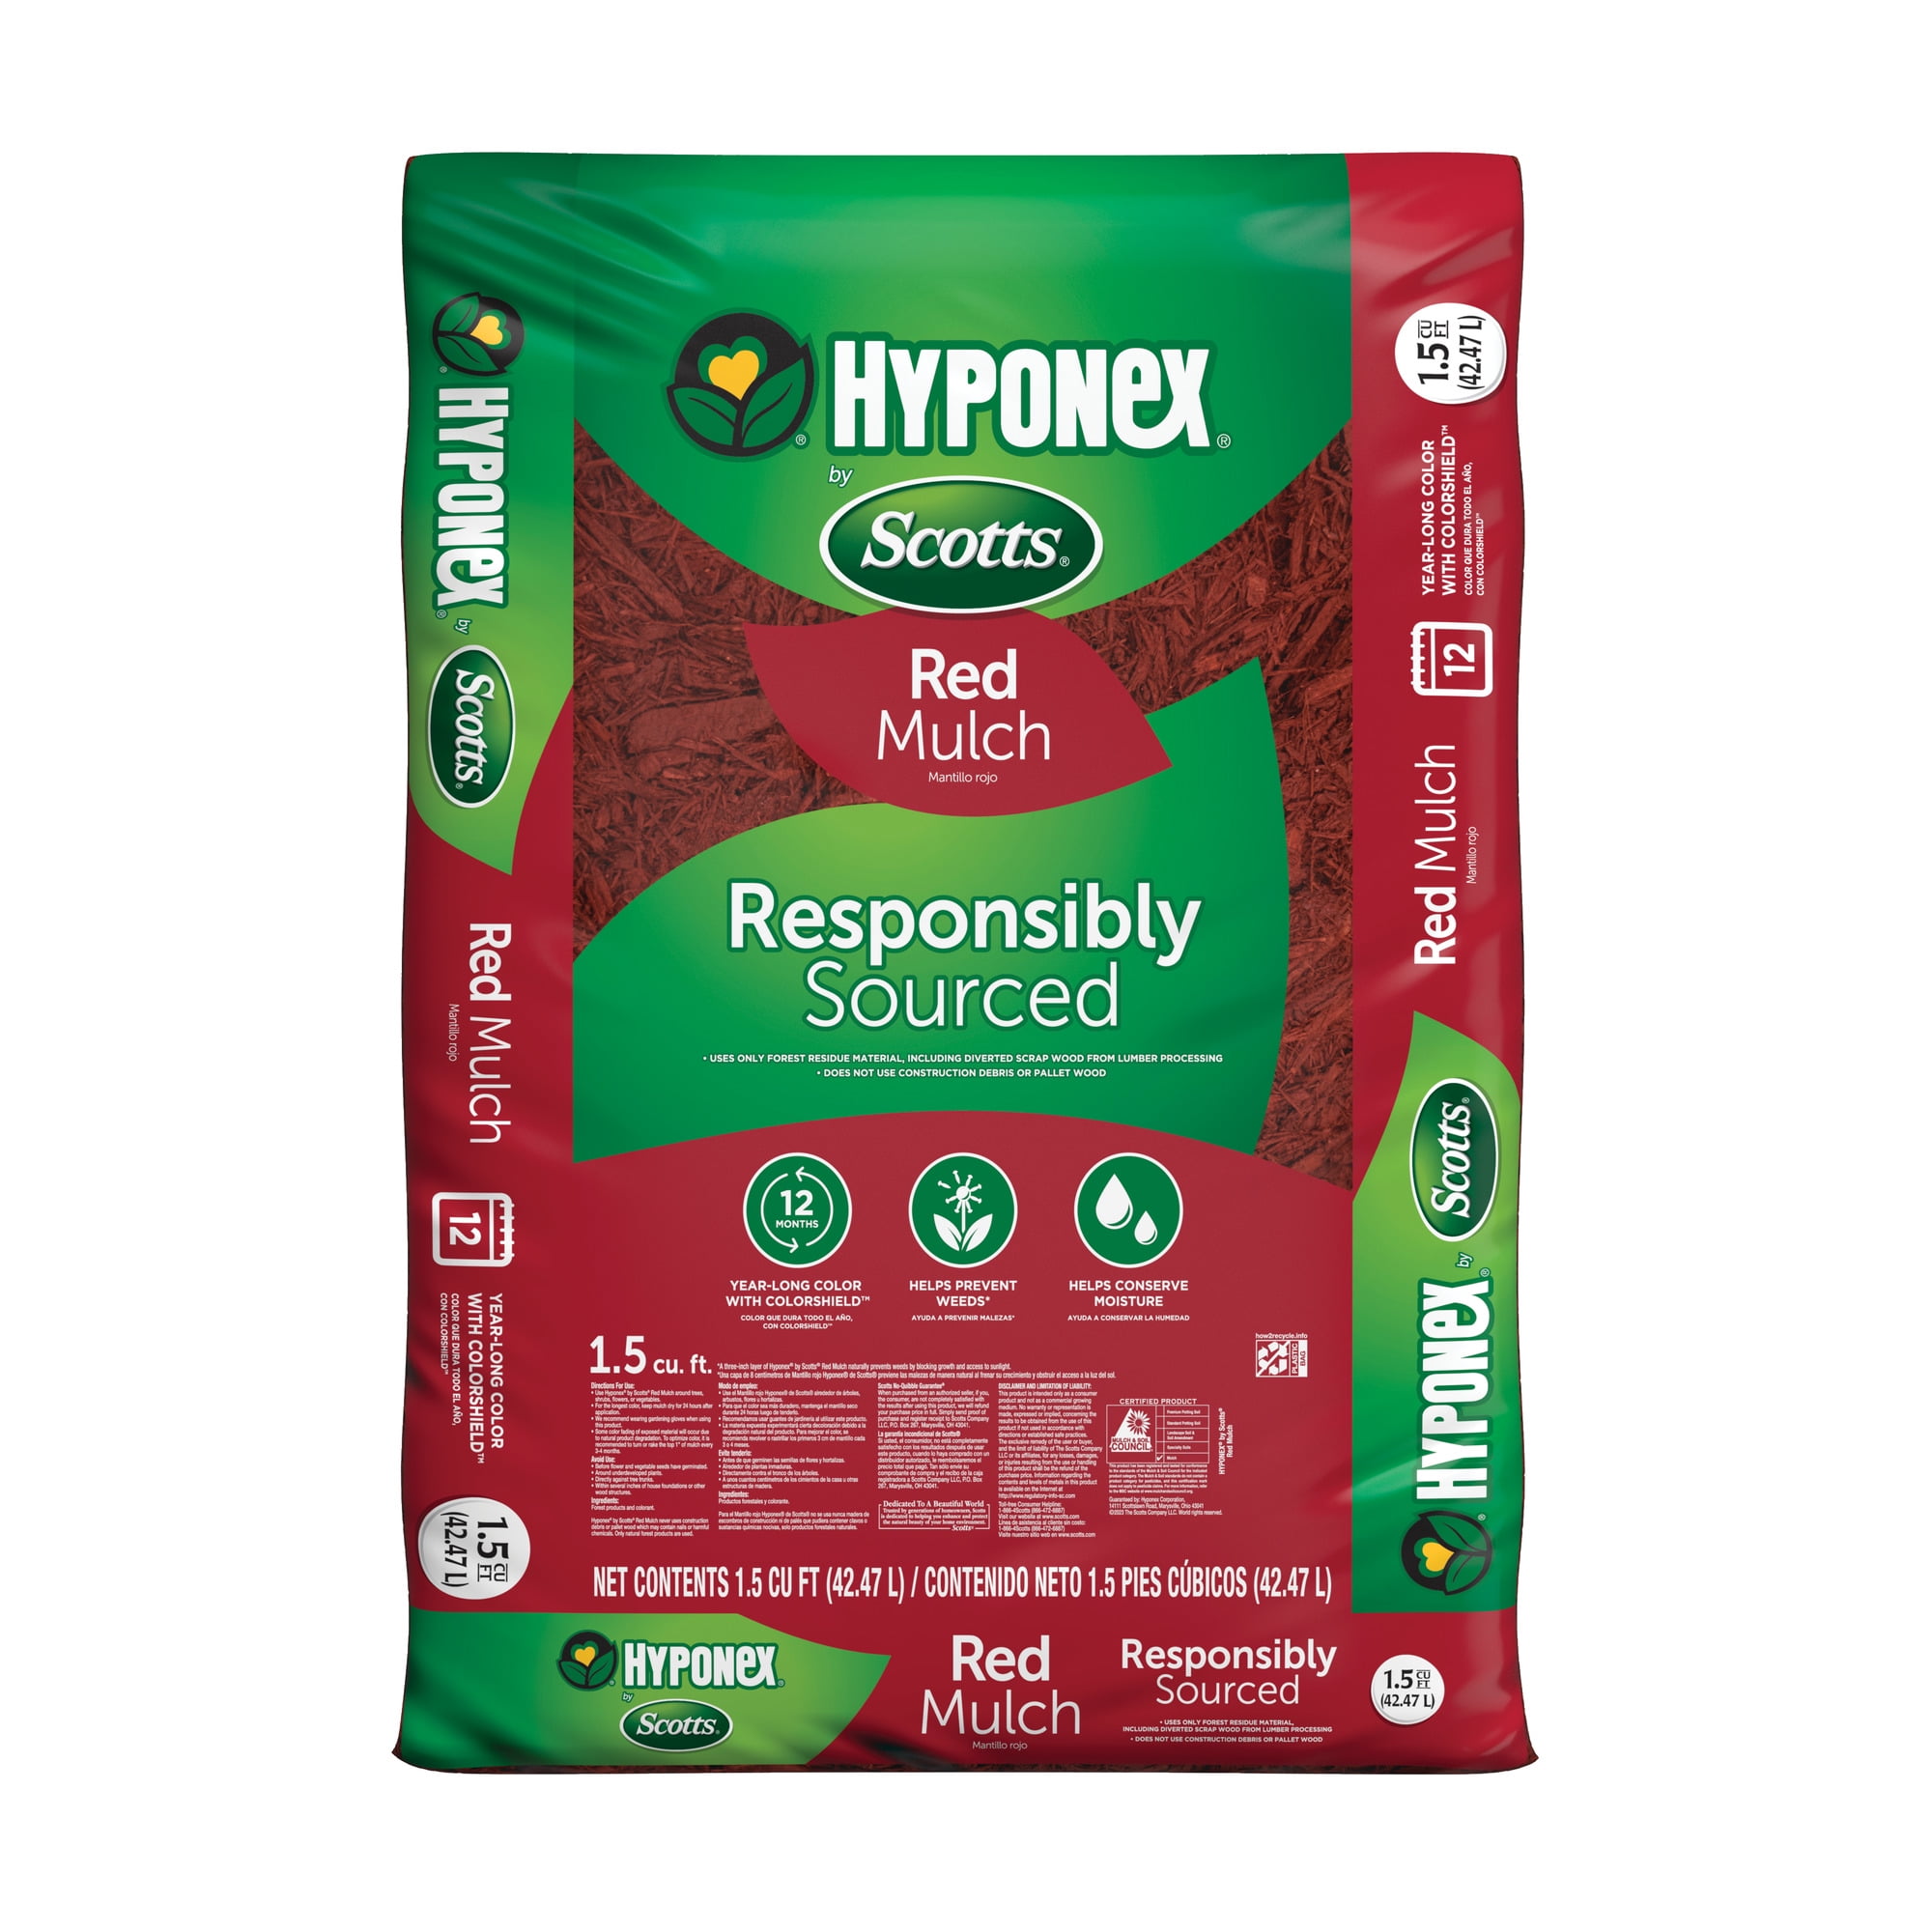 Hyponex by Scotts Red Mulch, for Landscapes and Gardens, 1.5 Cu. ft.